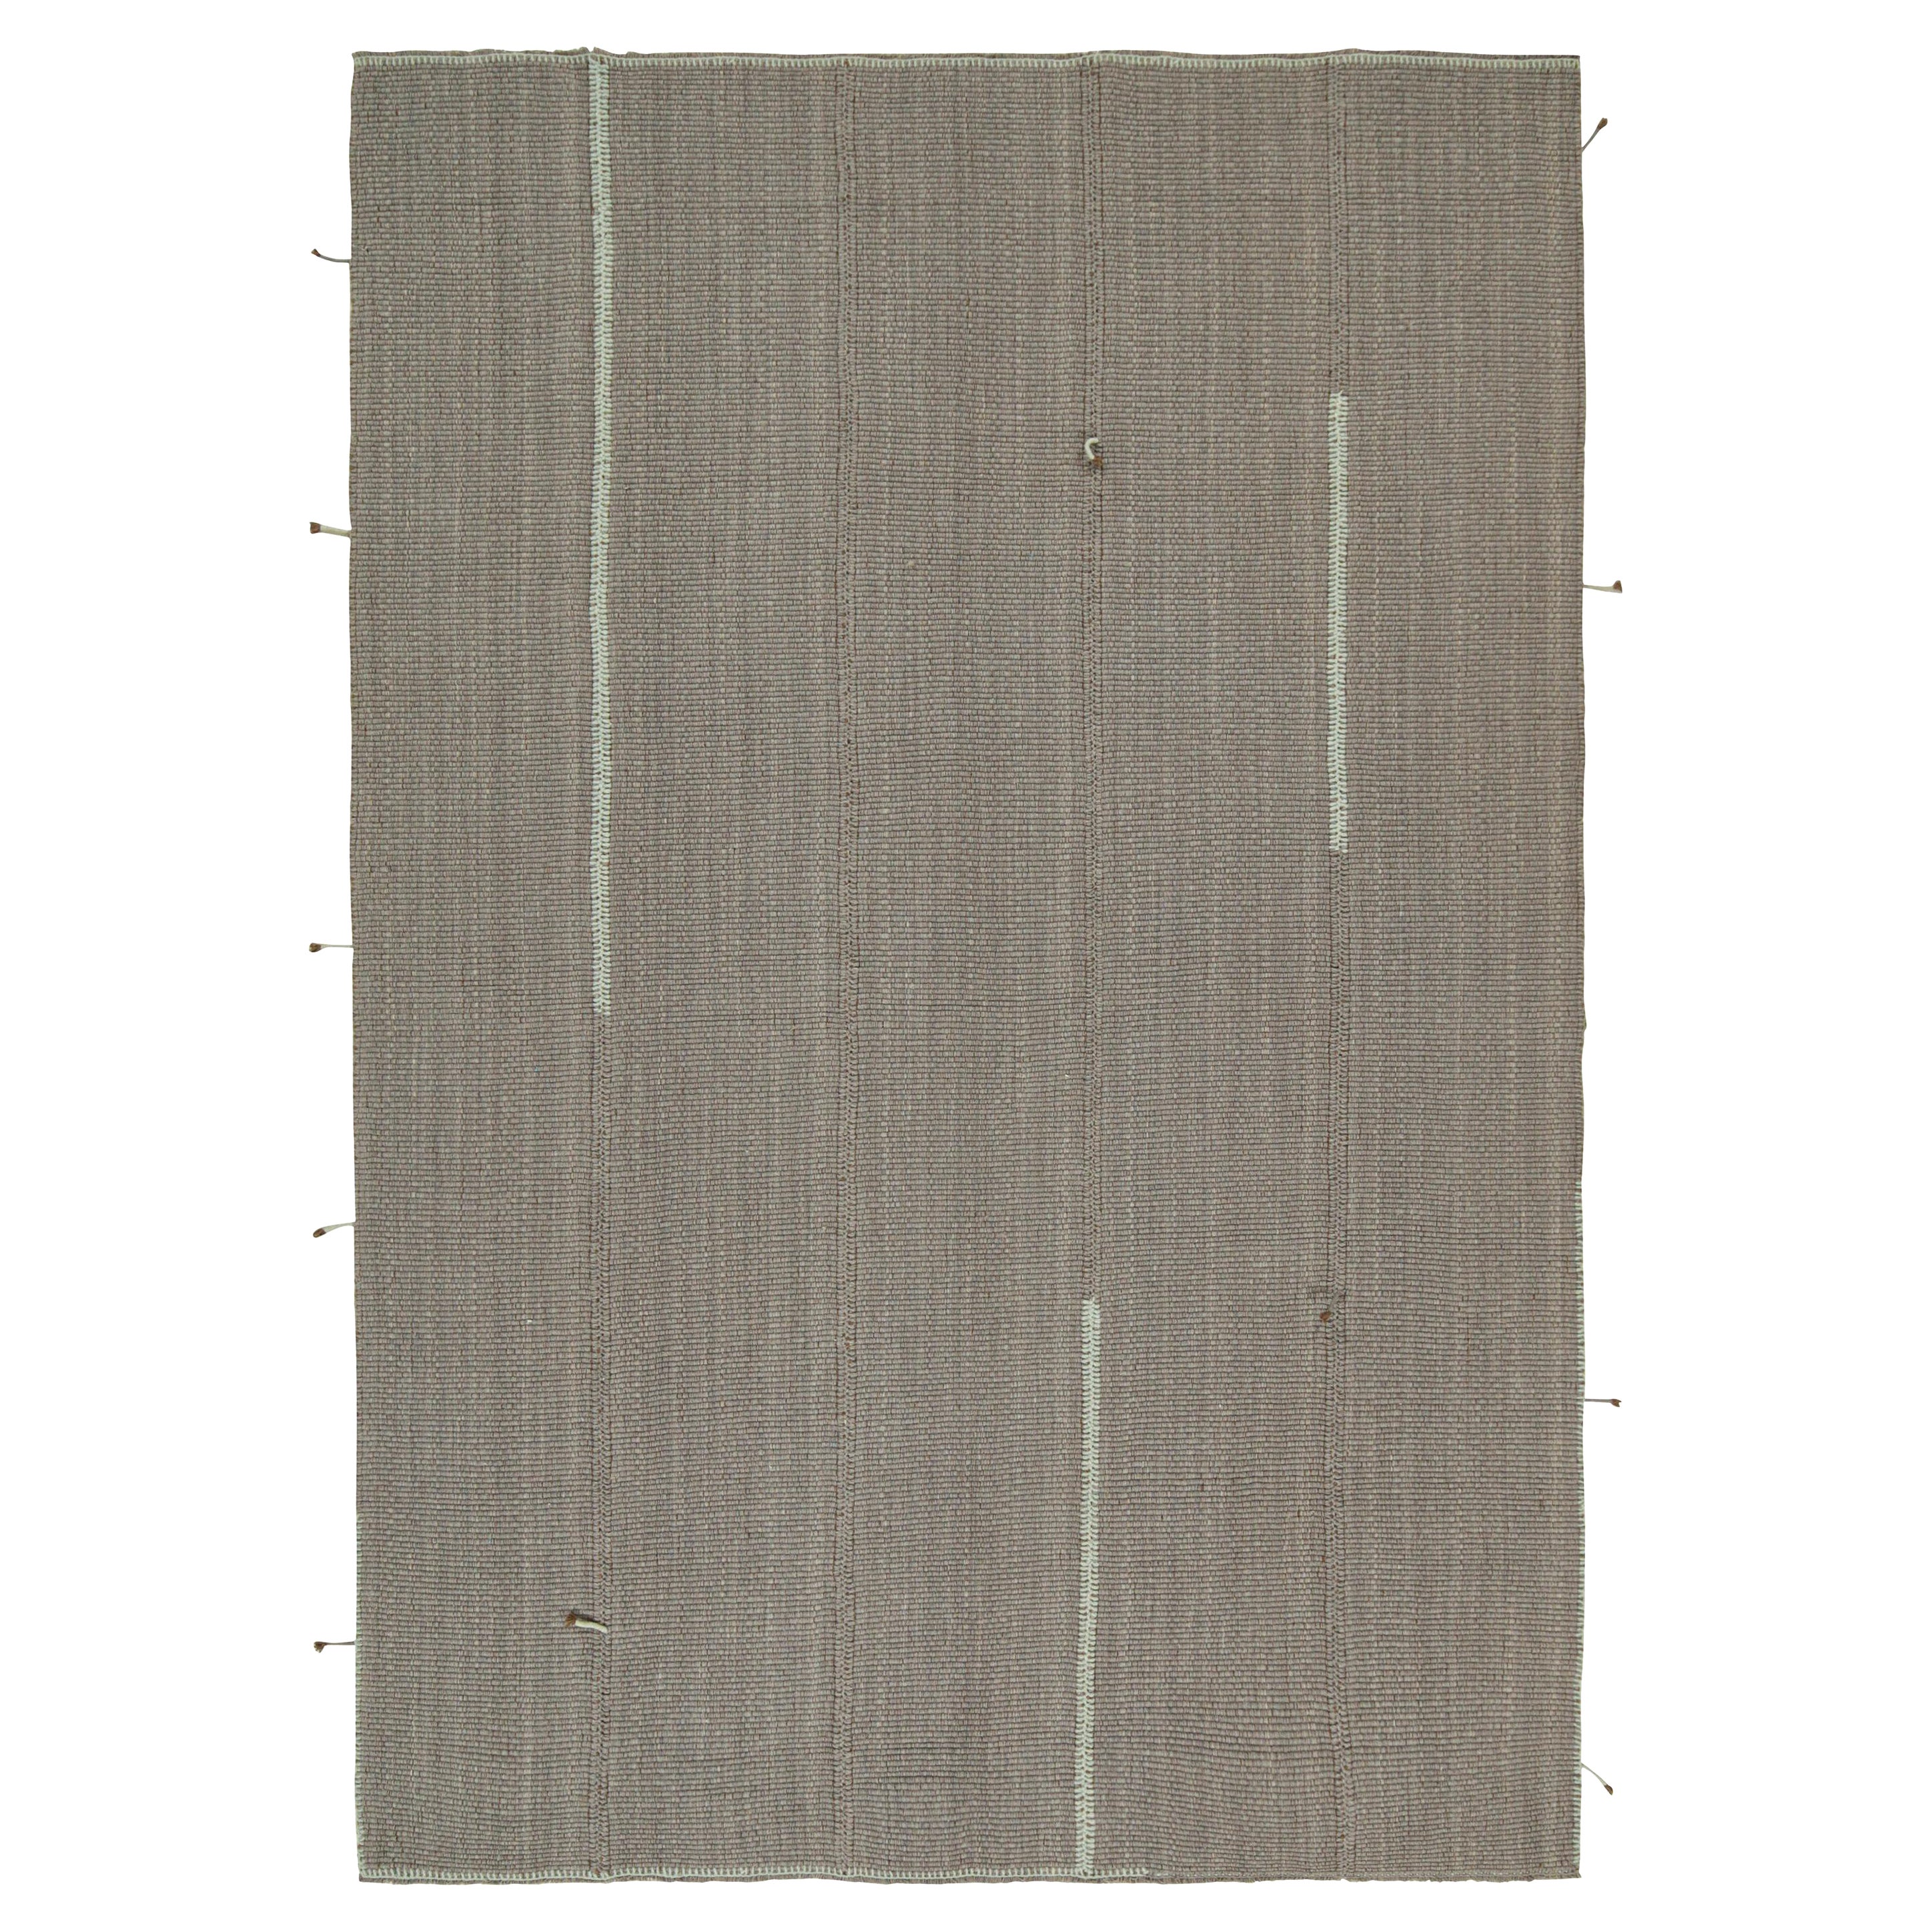 Rug & Kilim’s Contemporary Kilim Rug in Gray with Sky Blue and Brown Accents